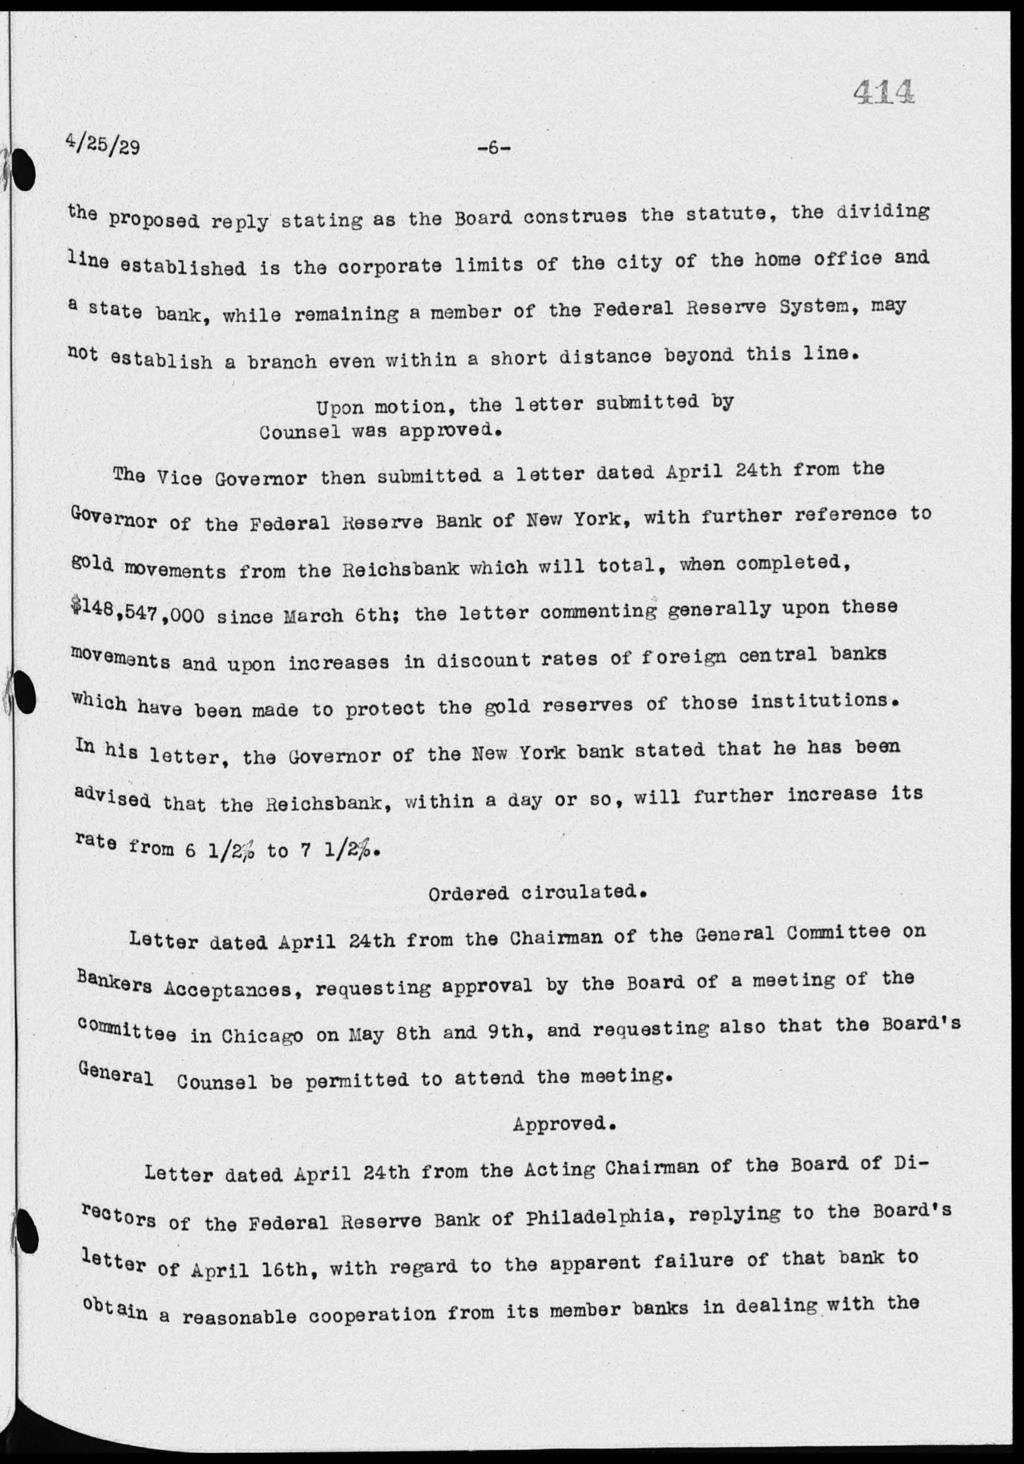 4/25/29-6- the Proposed reply stating as the Board construes the statute, the dividing line established is the corporate limits of the city of the home office and a state bank, while remaining a